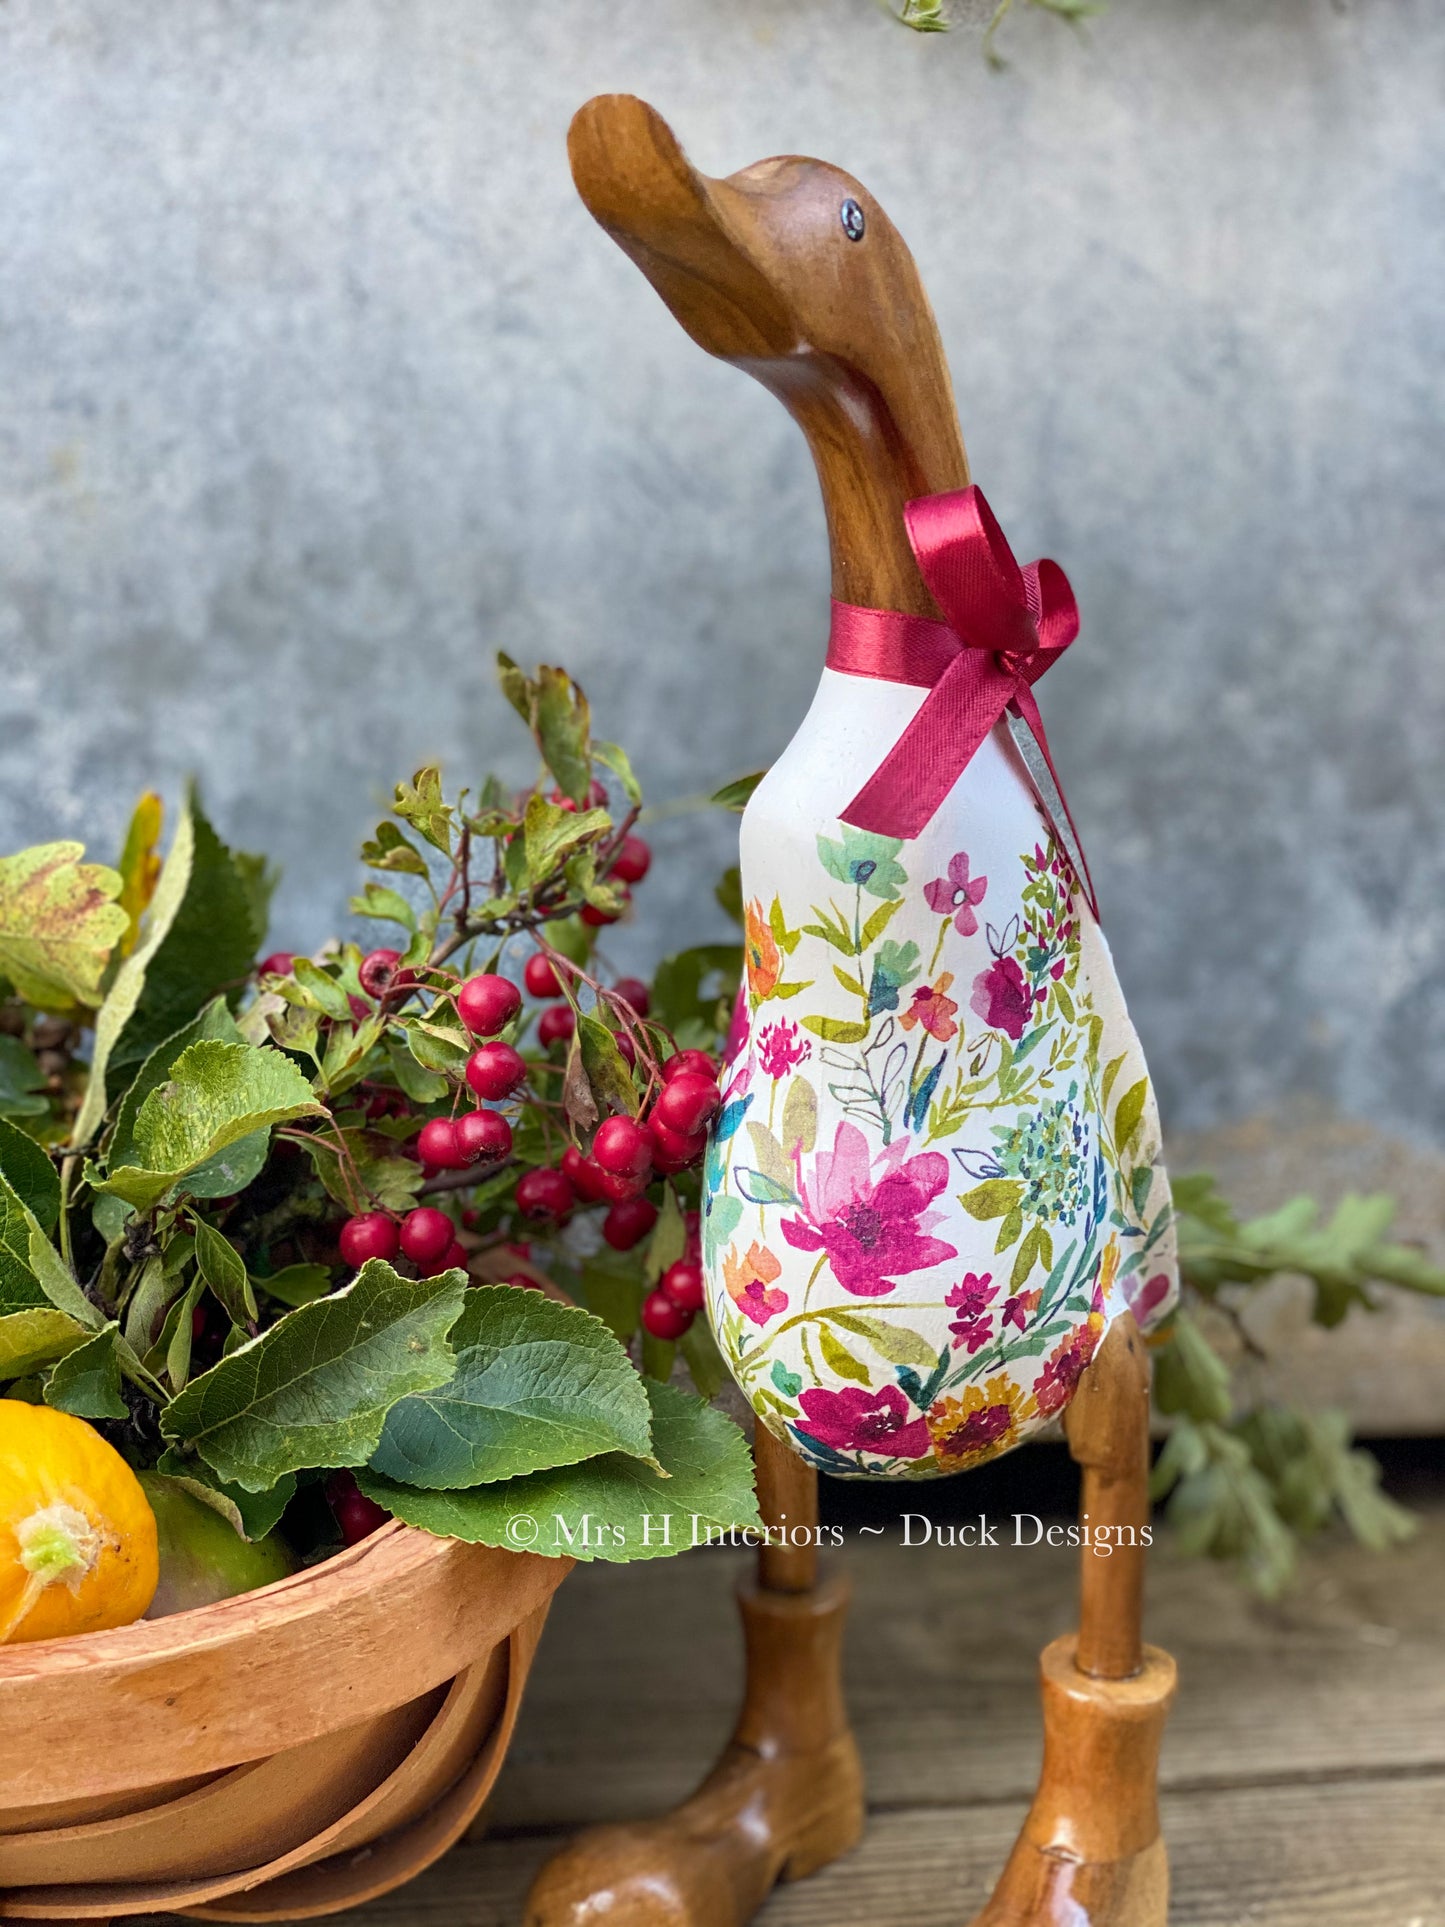 Autumn Flower - Decorated Wooden Duck in Boots by Mrs H the Duck Lady